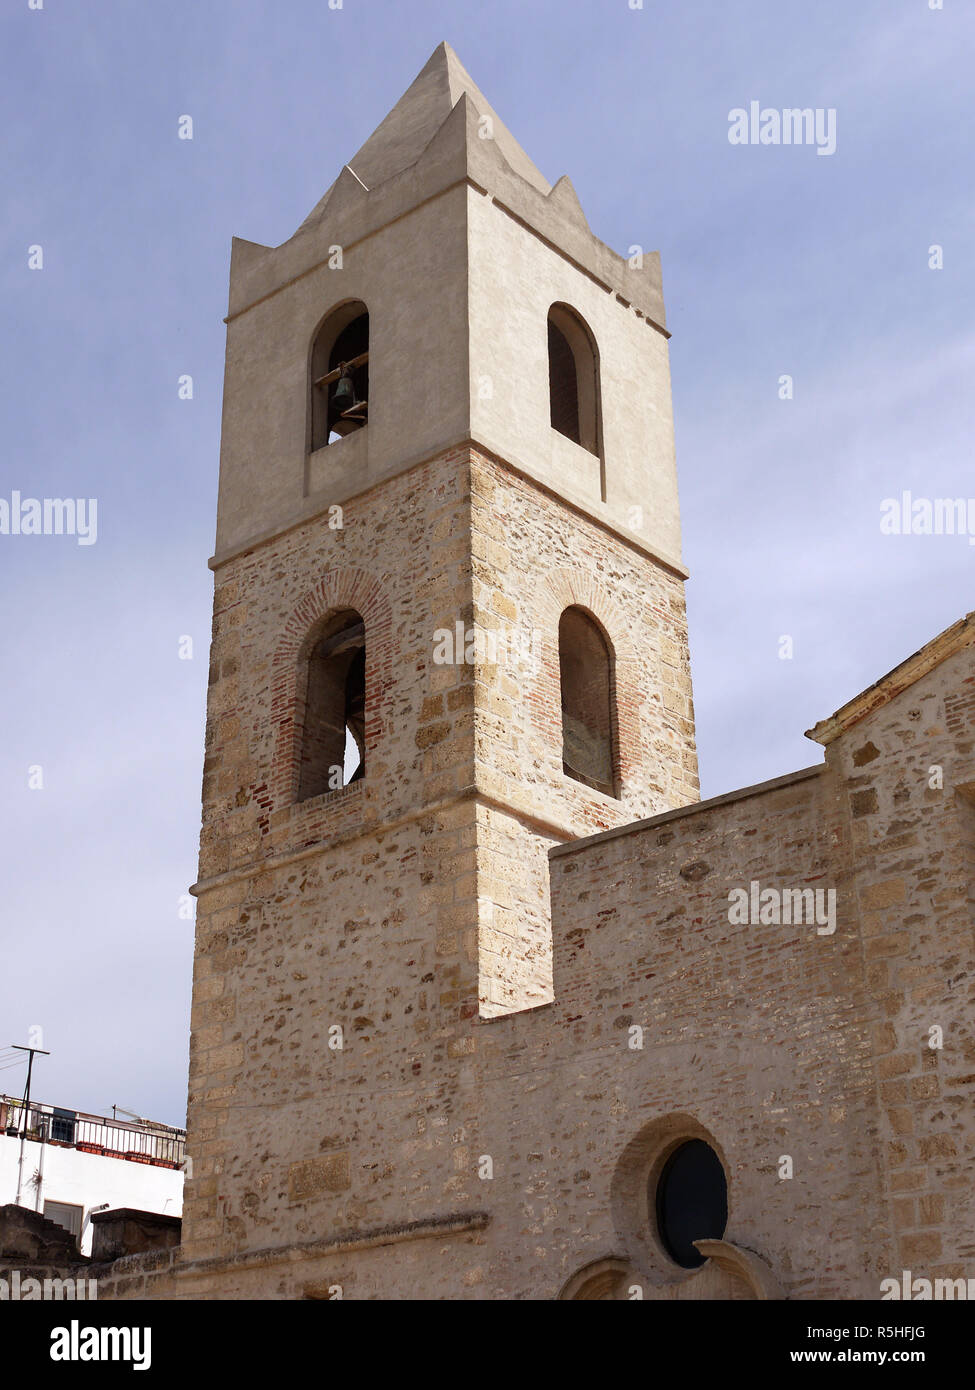 The tower of the church opposite the castle  of the hilltop town of Bernalda in Basilicata, Southern Italy Stock Photo